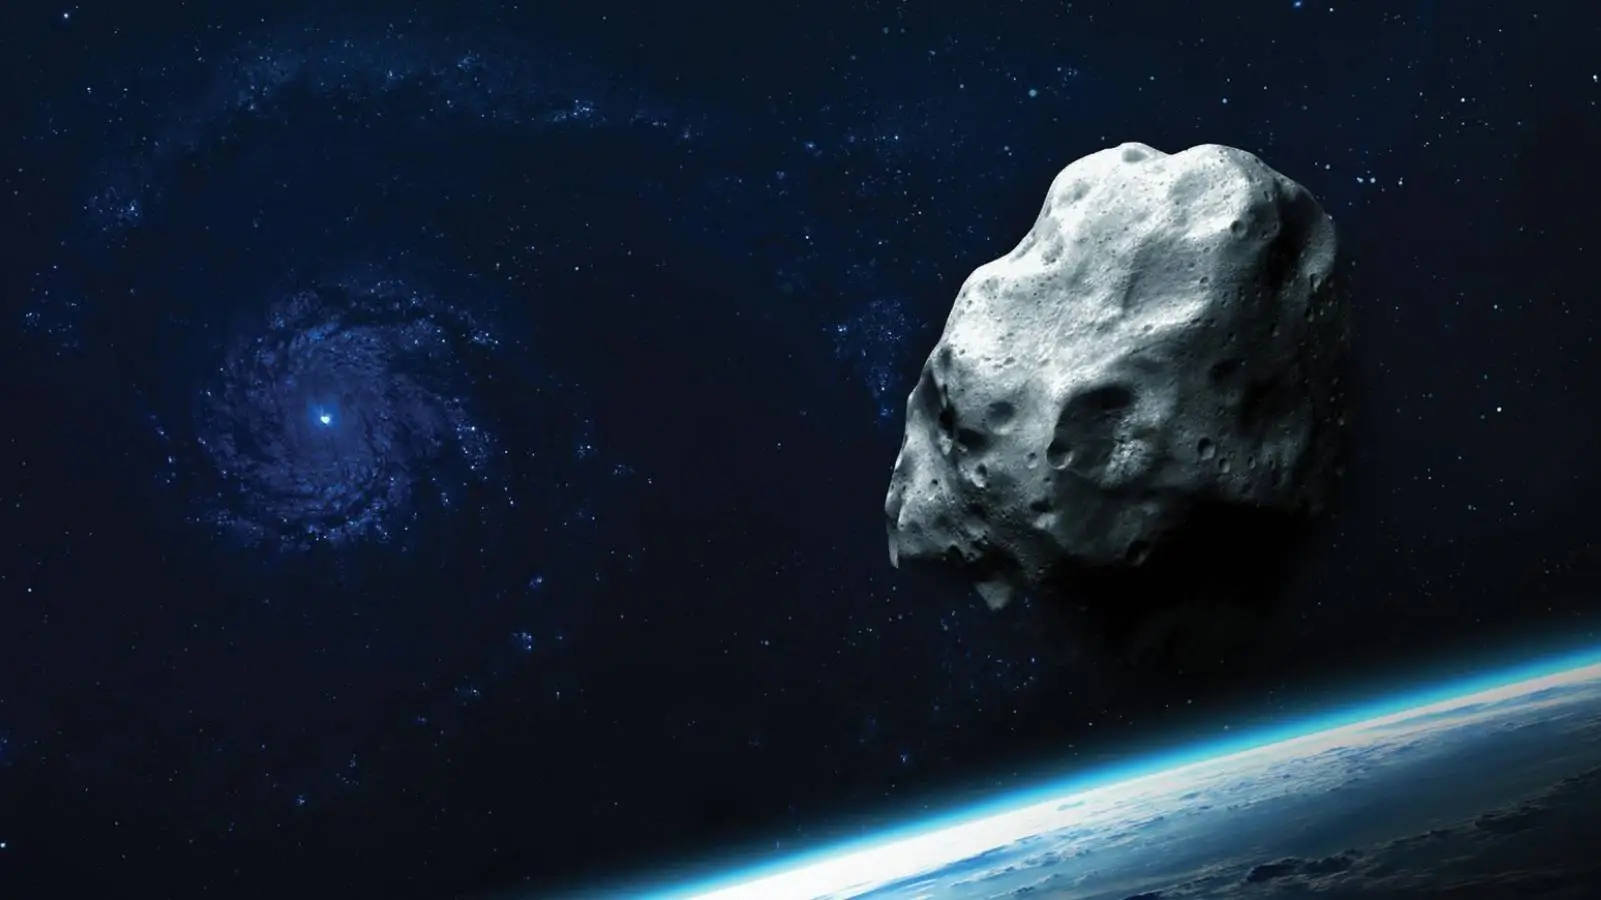 NASA ATENTIONEAZA Privire Asteroid Mare Apropie Pamant